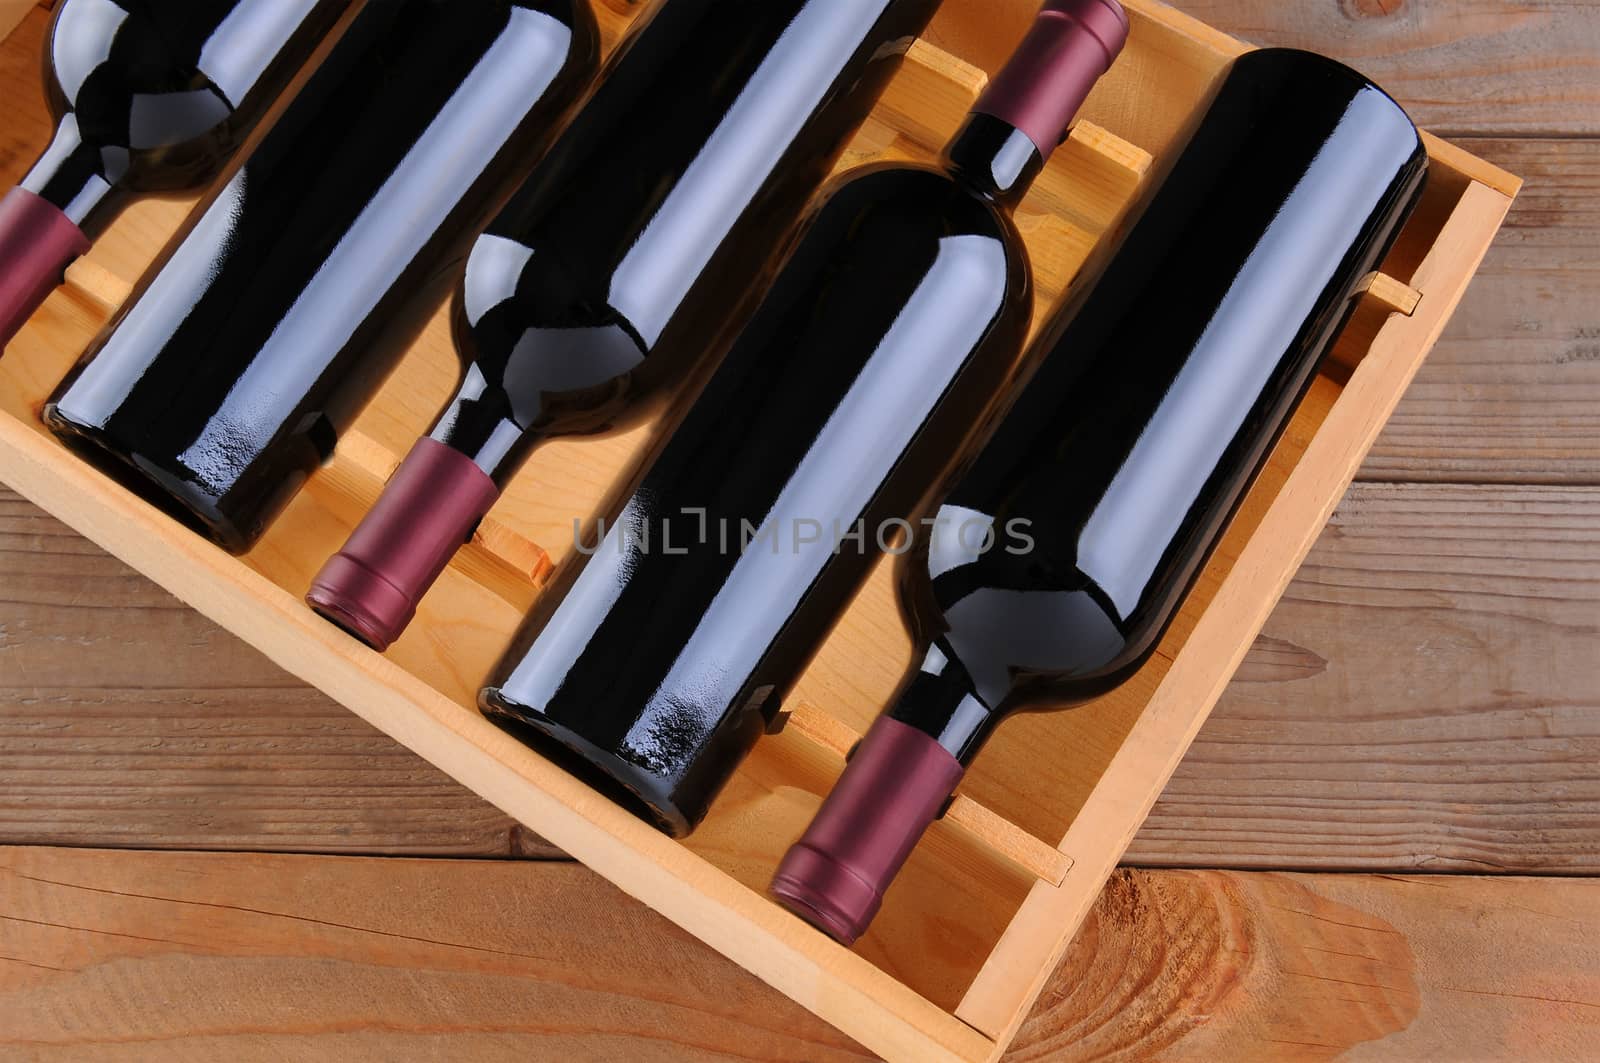 Top view of a case of cabernet sauvignon wine bottles. Horizontal format with a rustic wood background.